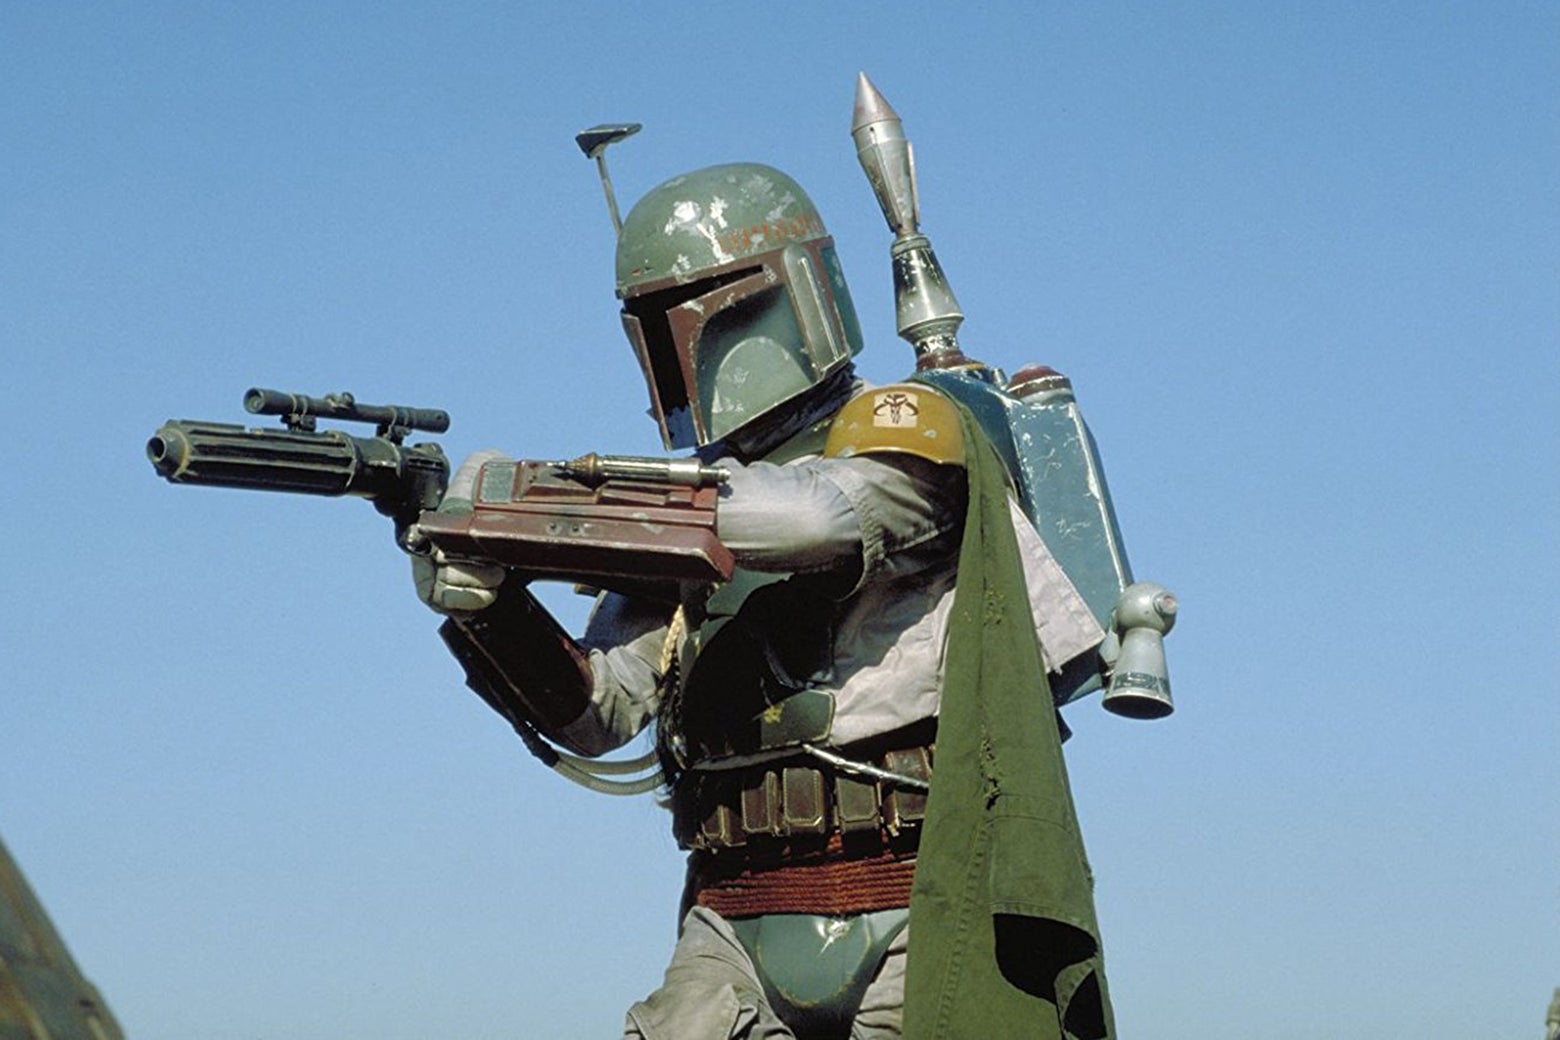 Boba Fett, shortly before he fell into the Sarlaac pit.